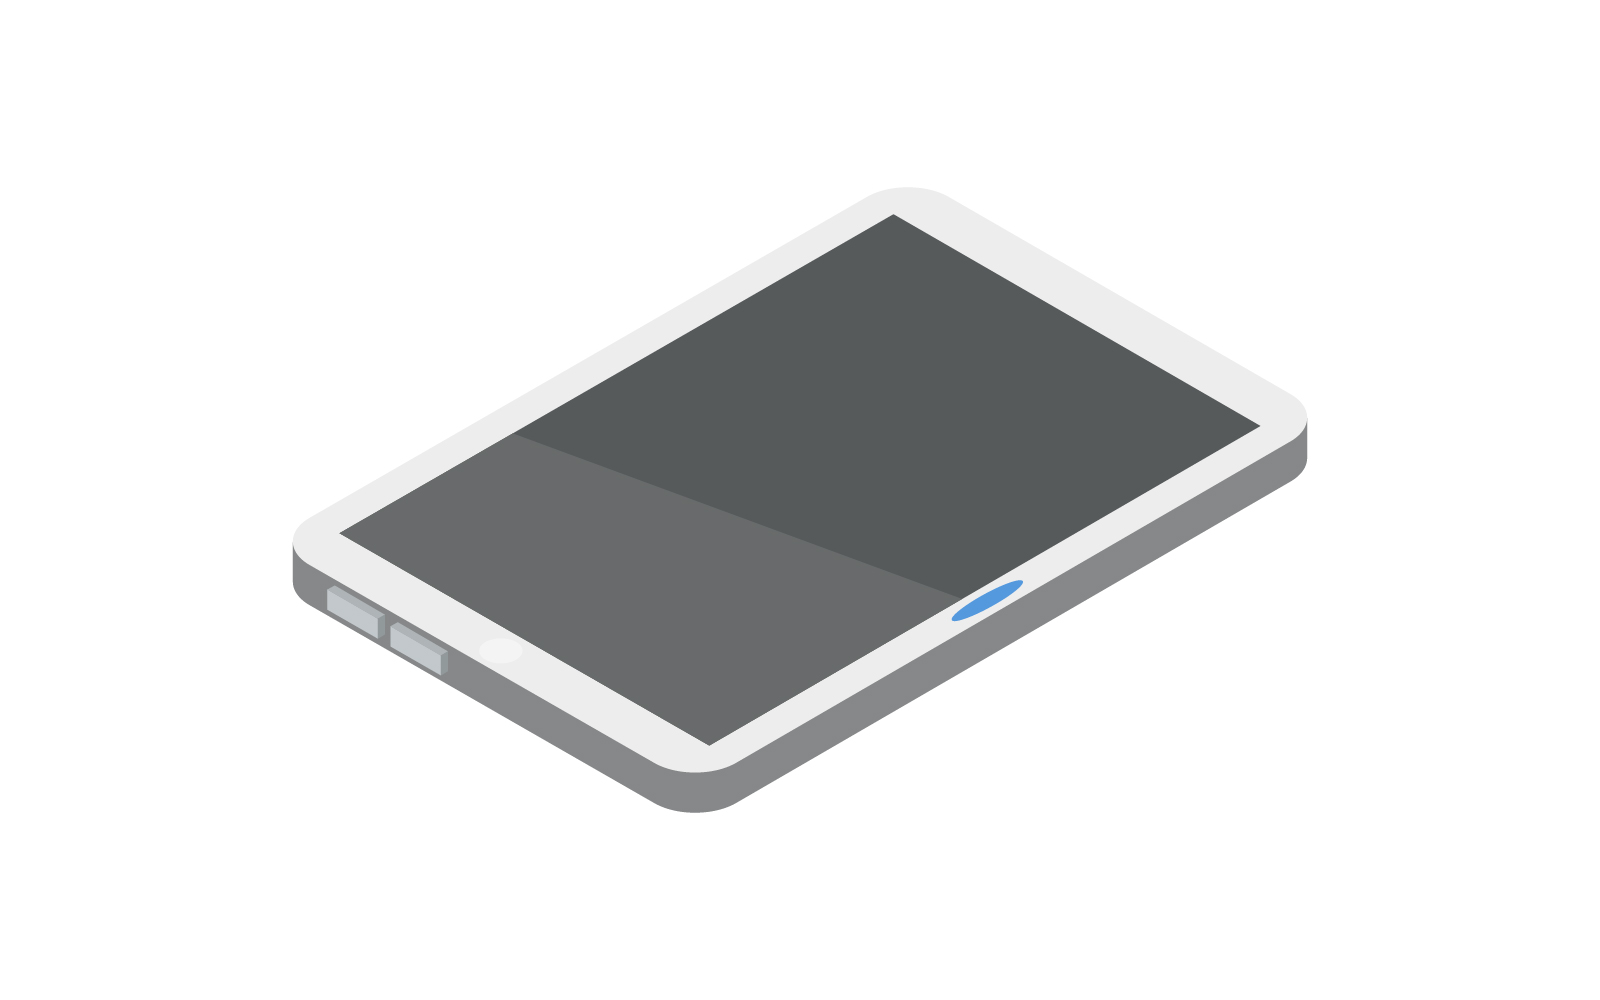 Isometric tablet illustrated in vector on background